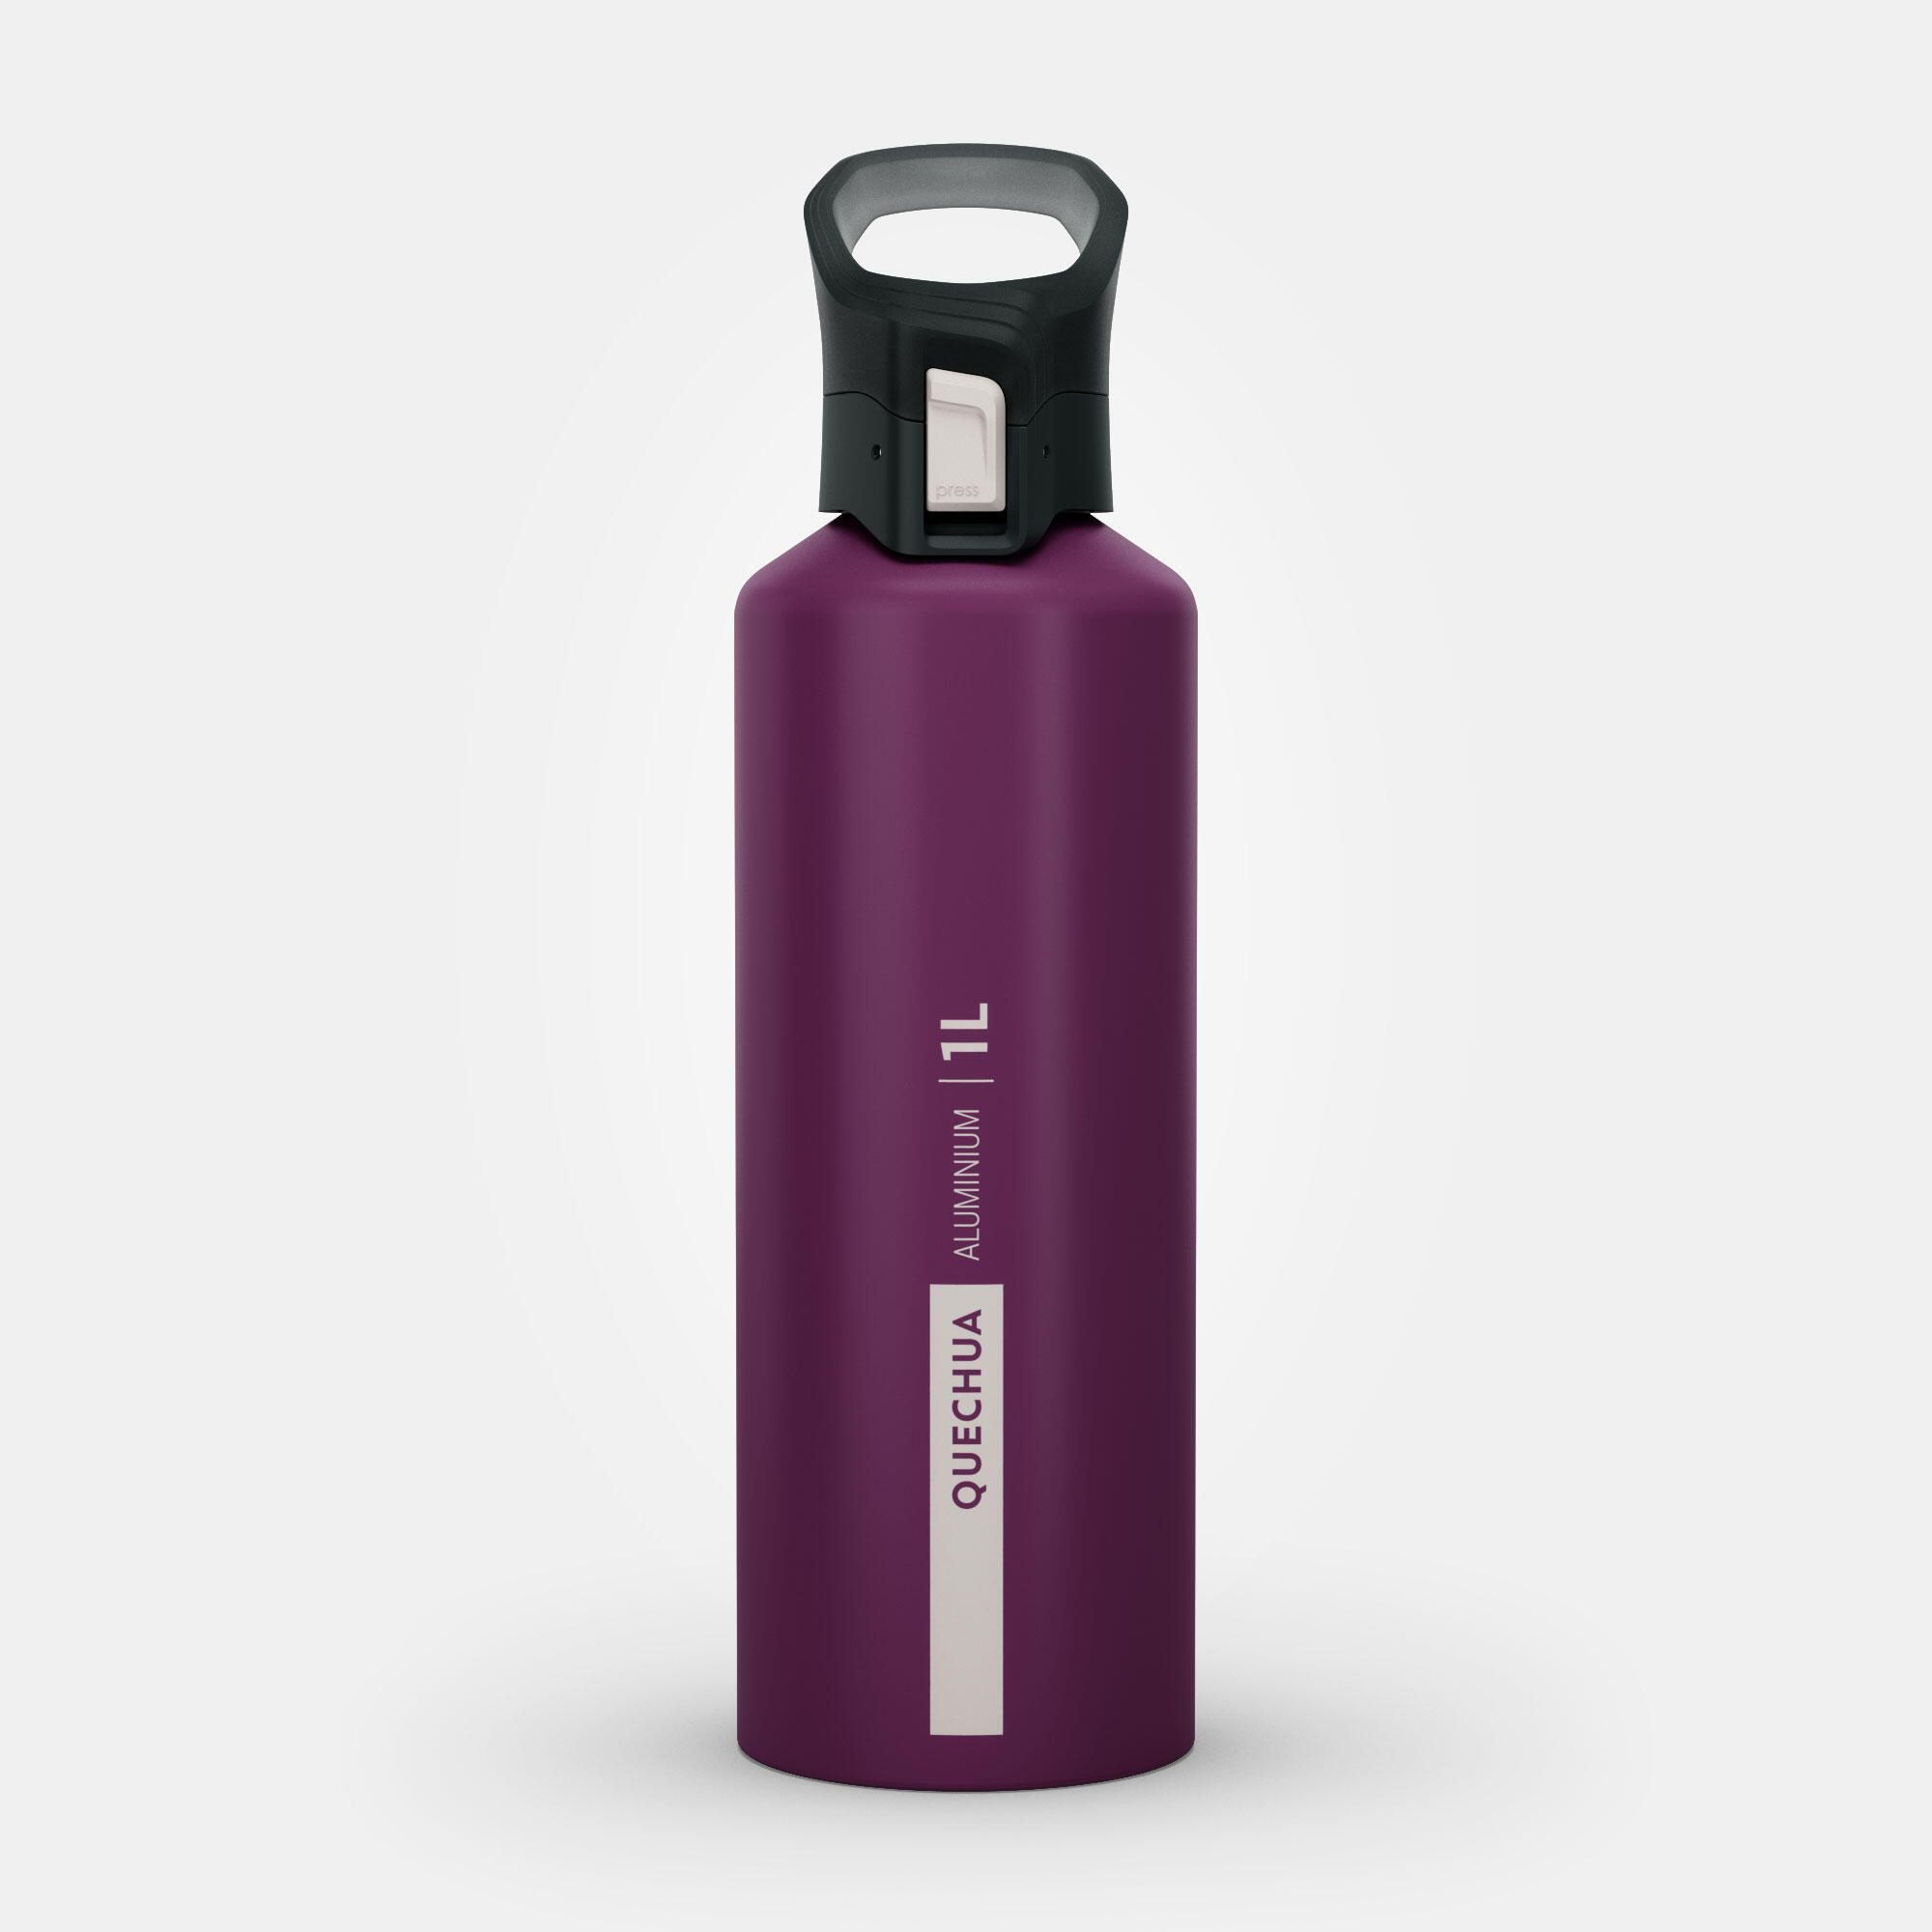 1 L aluminium flask with quick opening cap for hiking - Purple 11/12